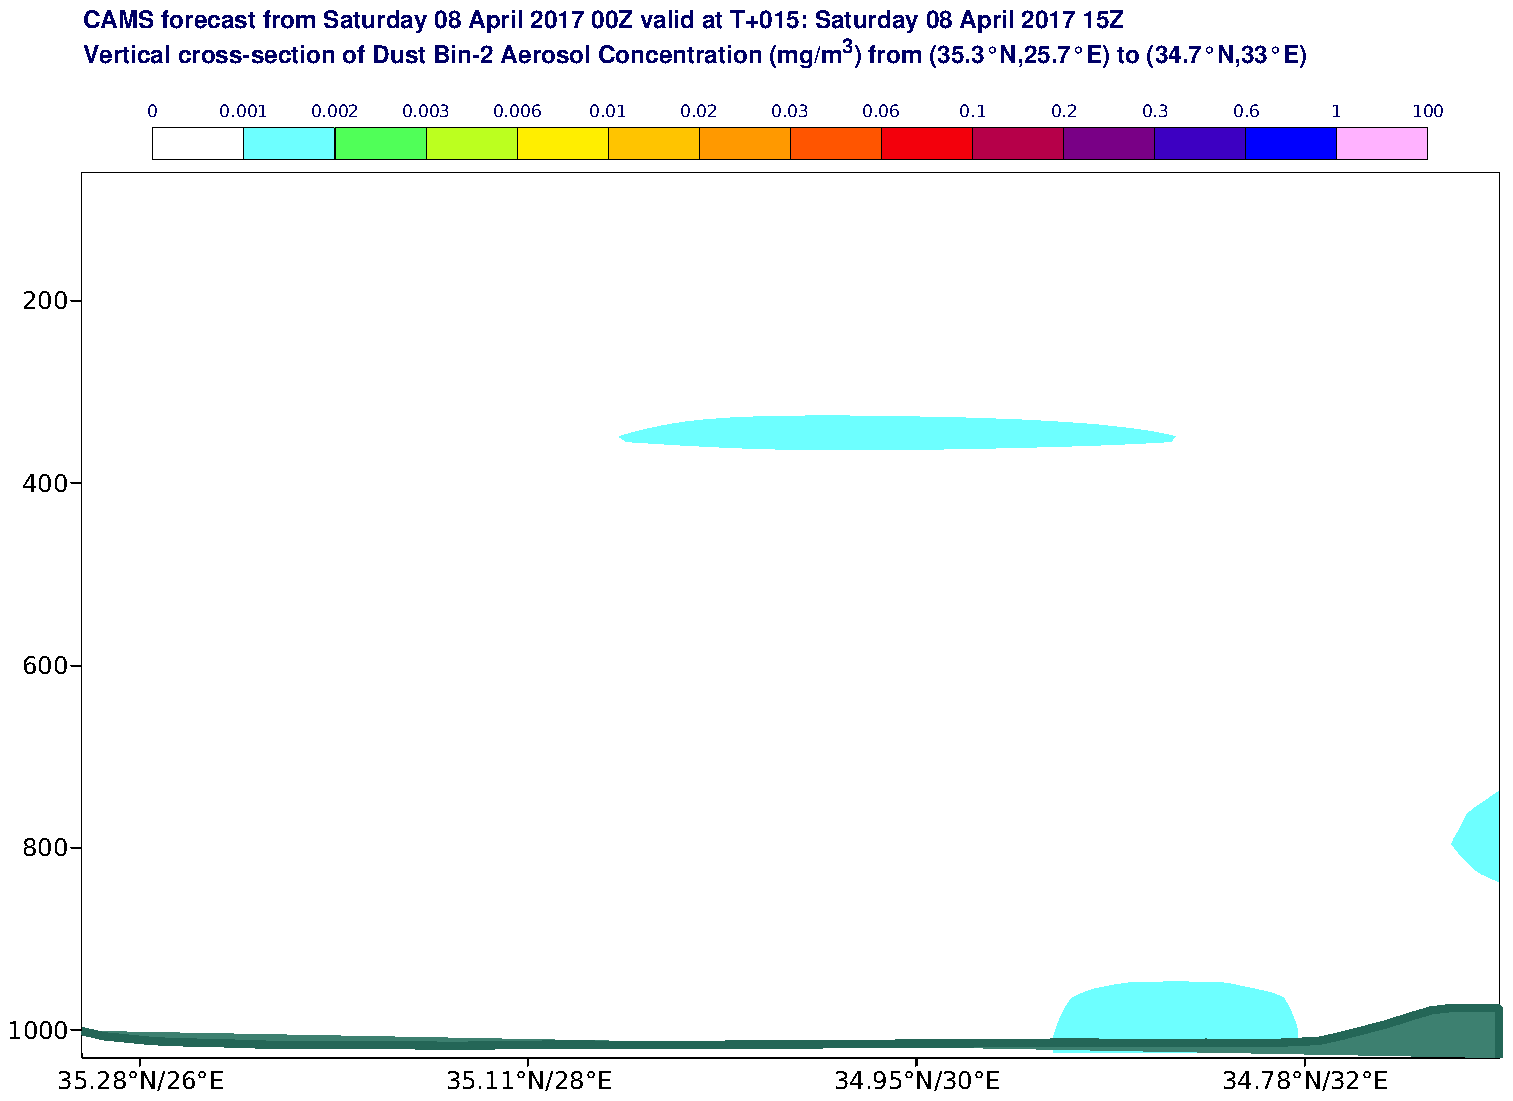 Vertical cross-section of Dust Bin-2 Aerosol Concentration (mg/m3) valid at T15 - 2017-04-08 15:00